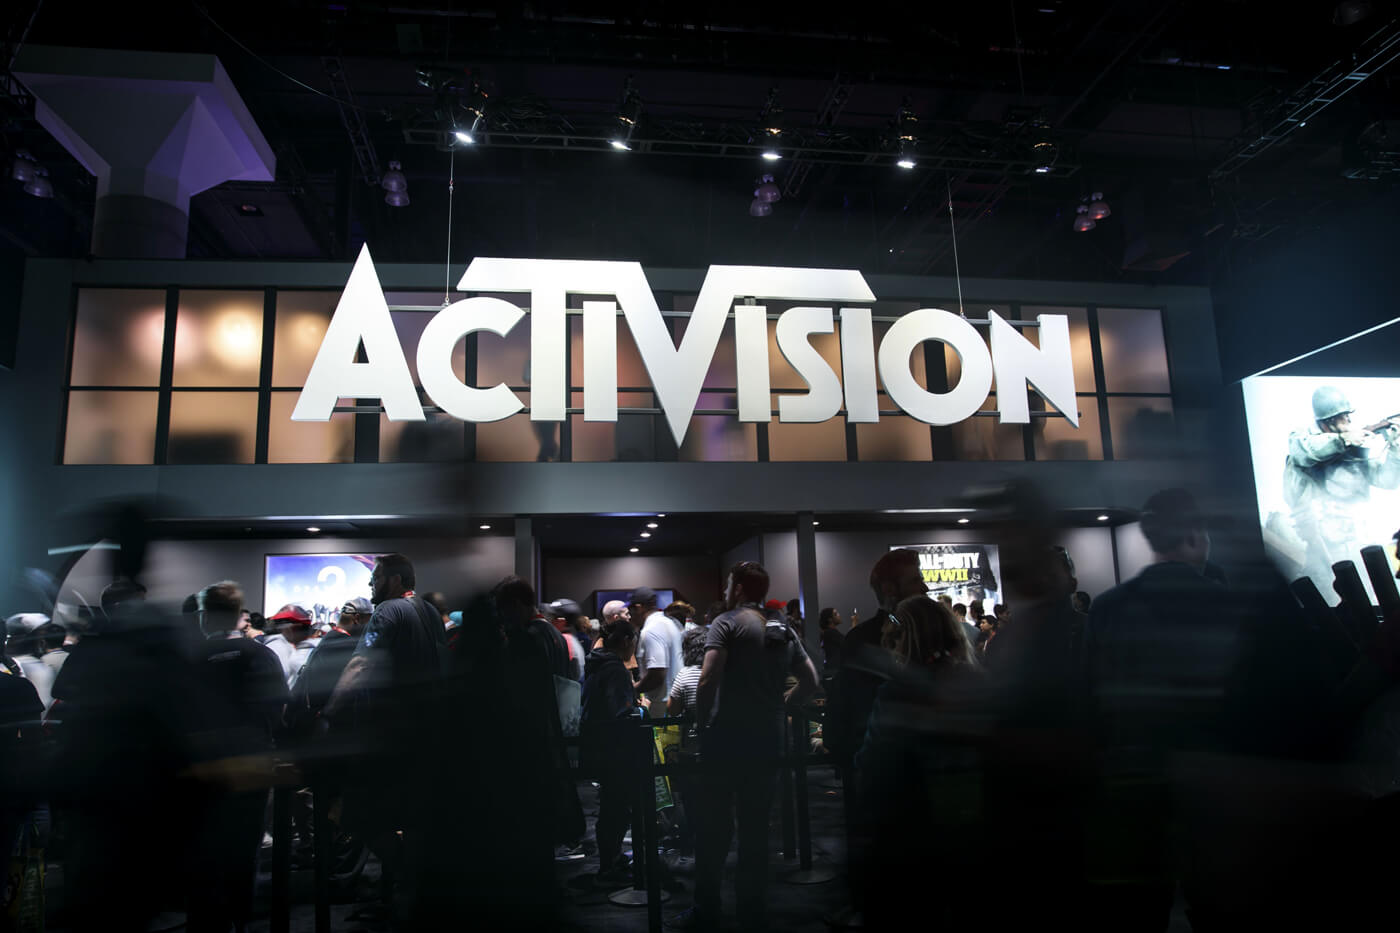 Activision CEO Bobby Kotick sent out his personal phone number to all 10,000 employees